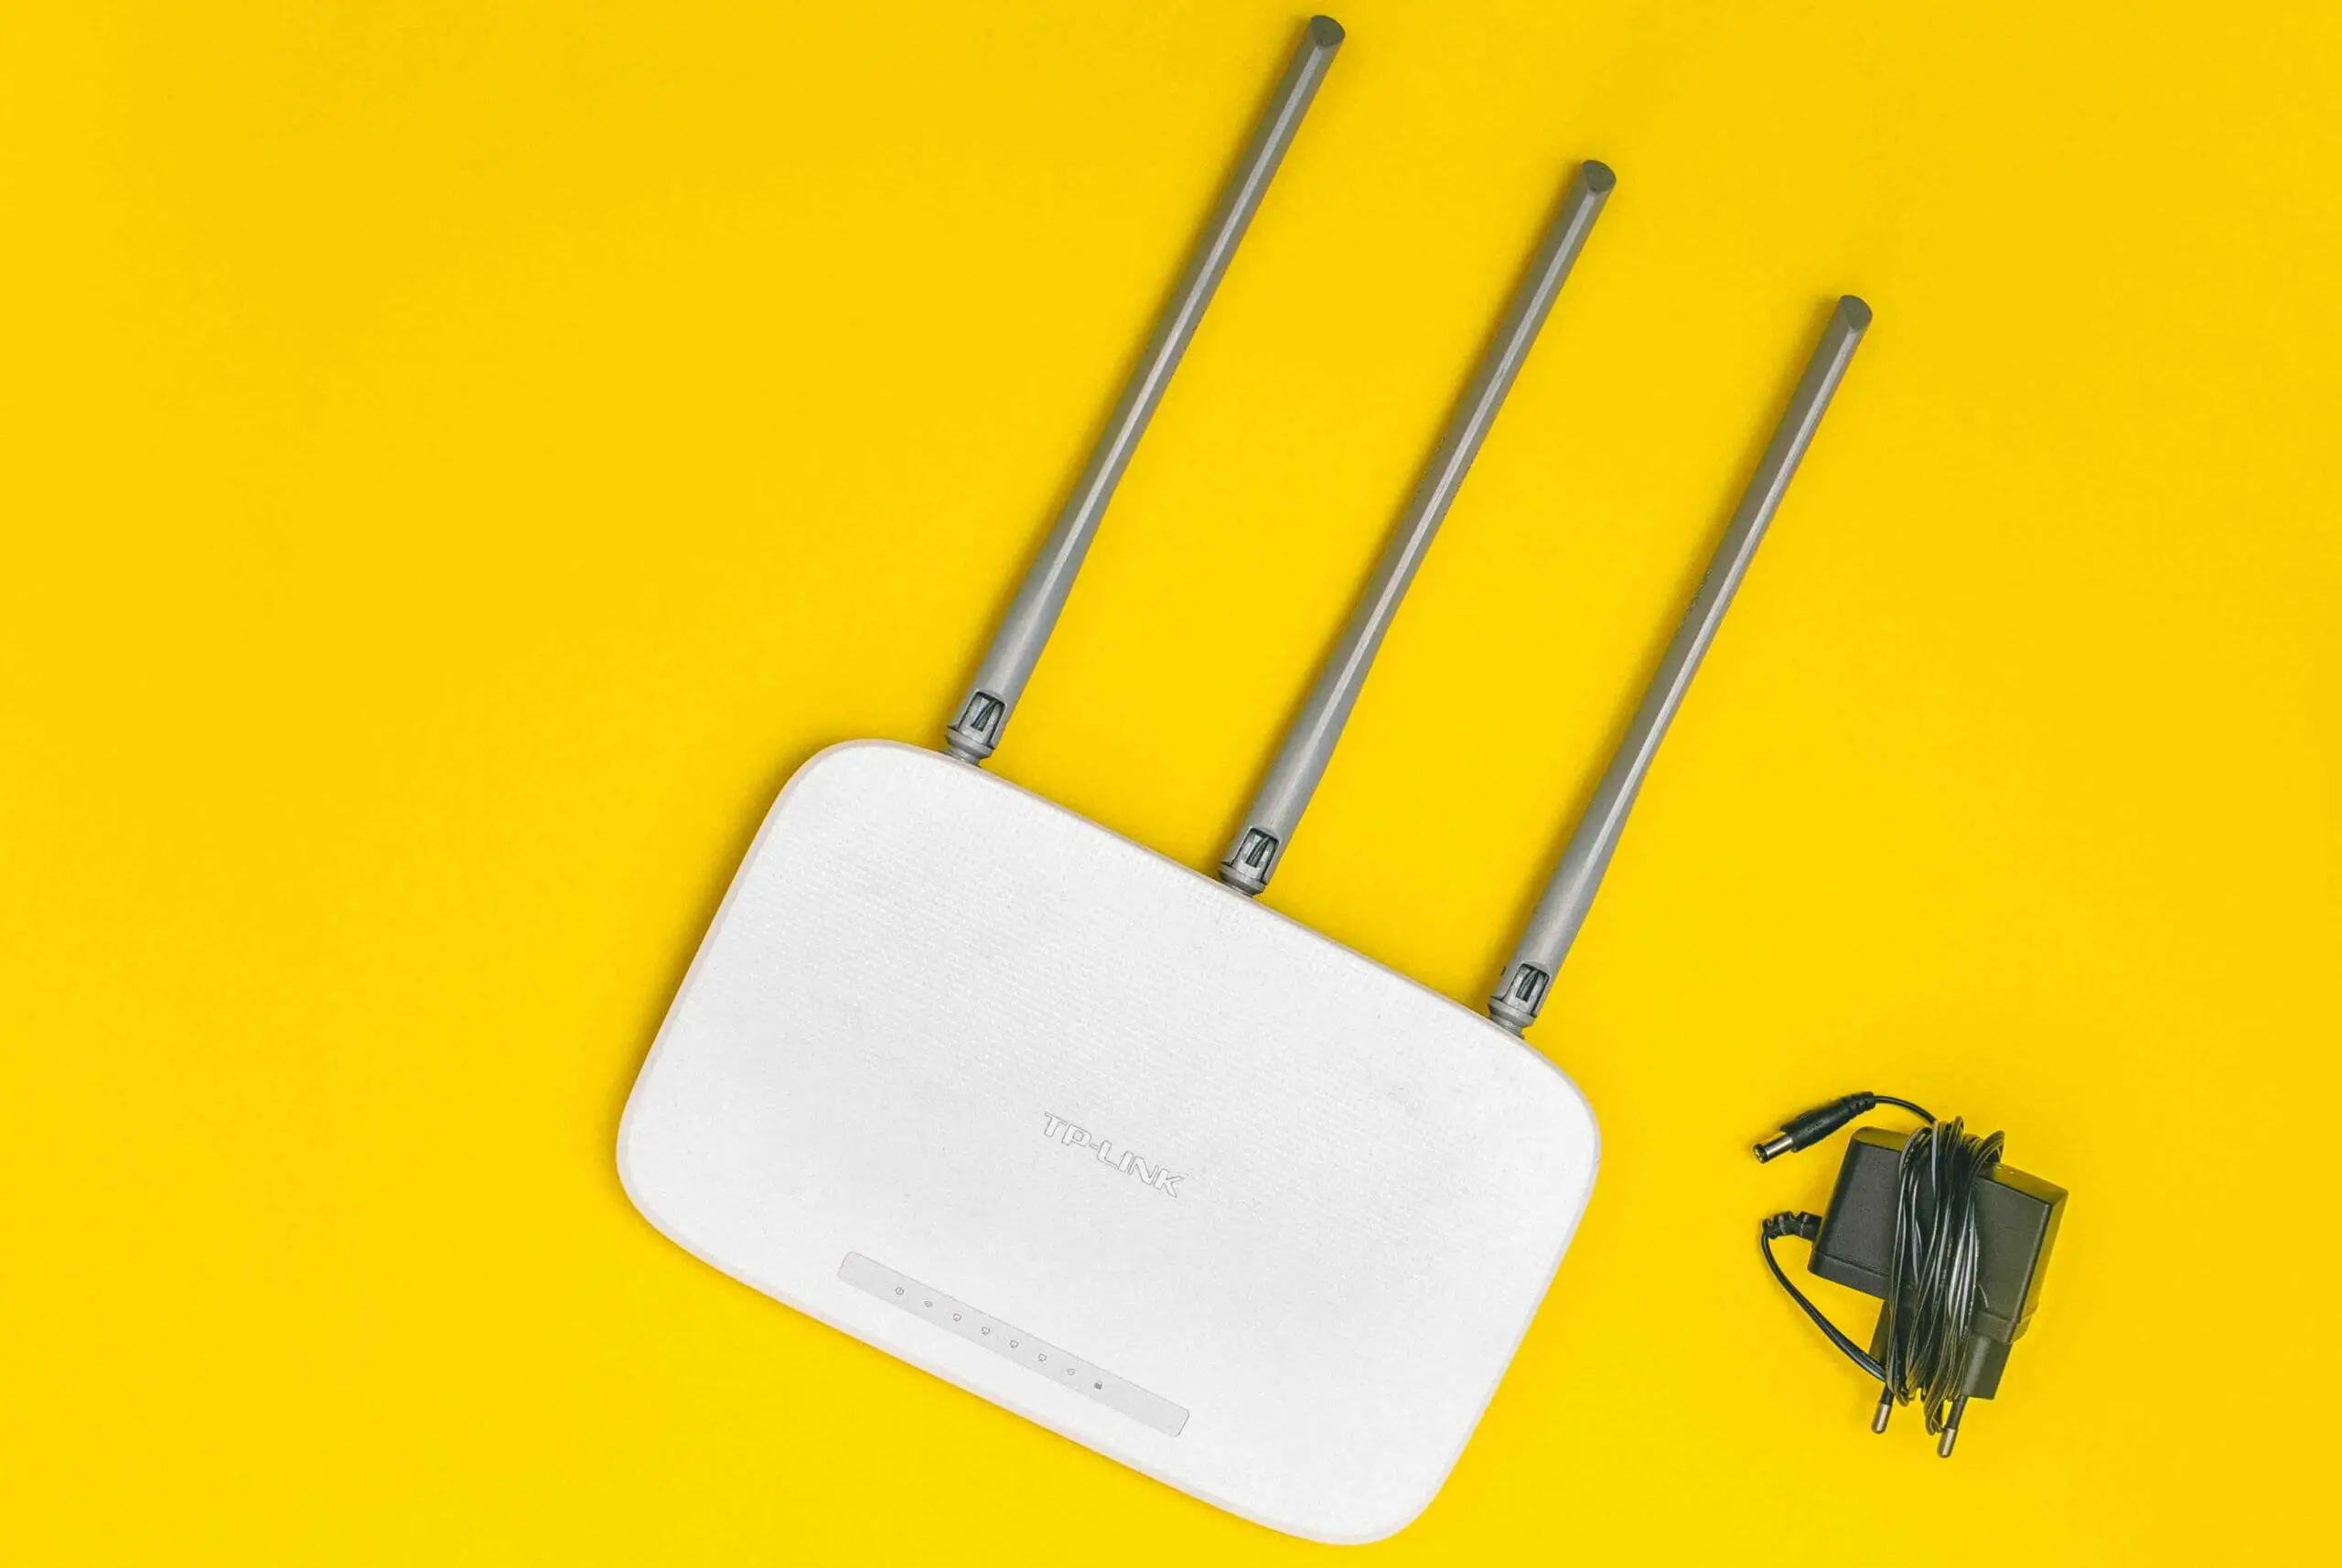 tplink router with cable wire in a yellow background